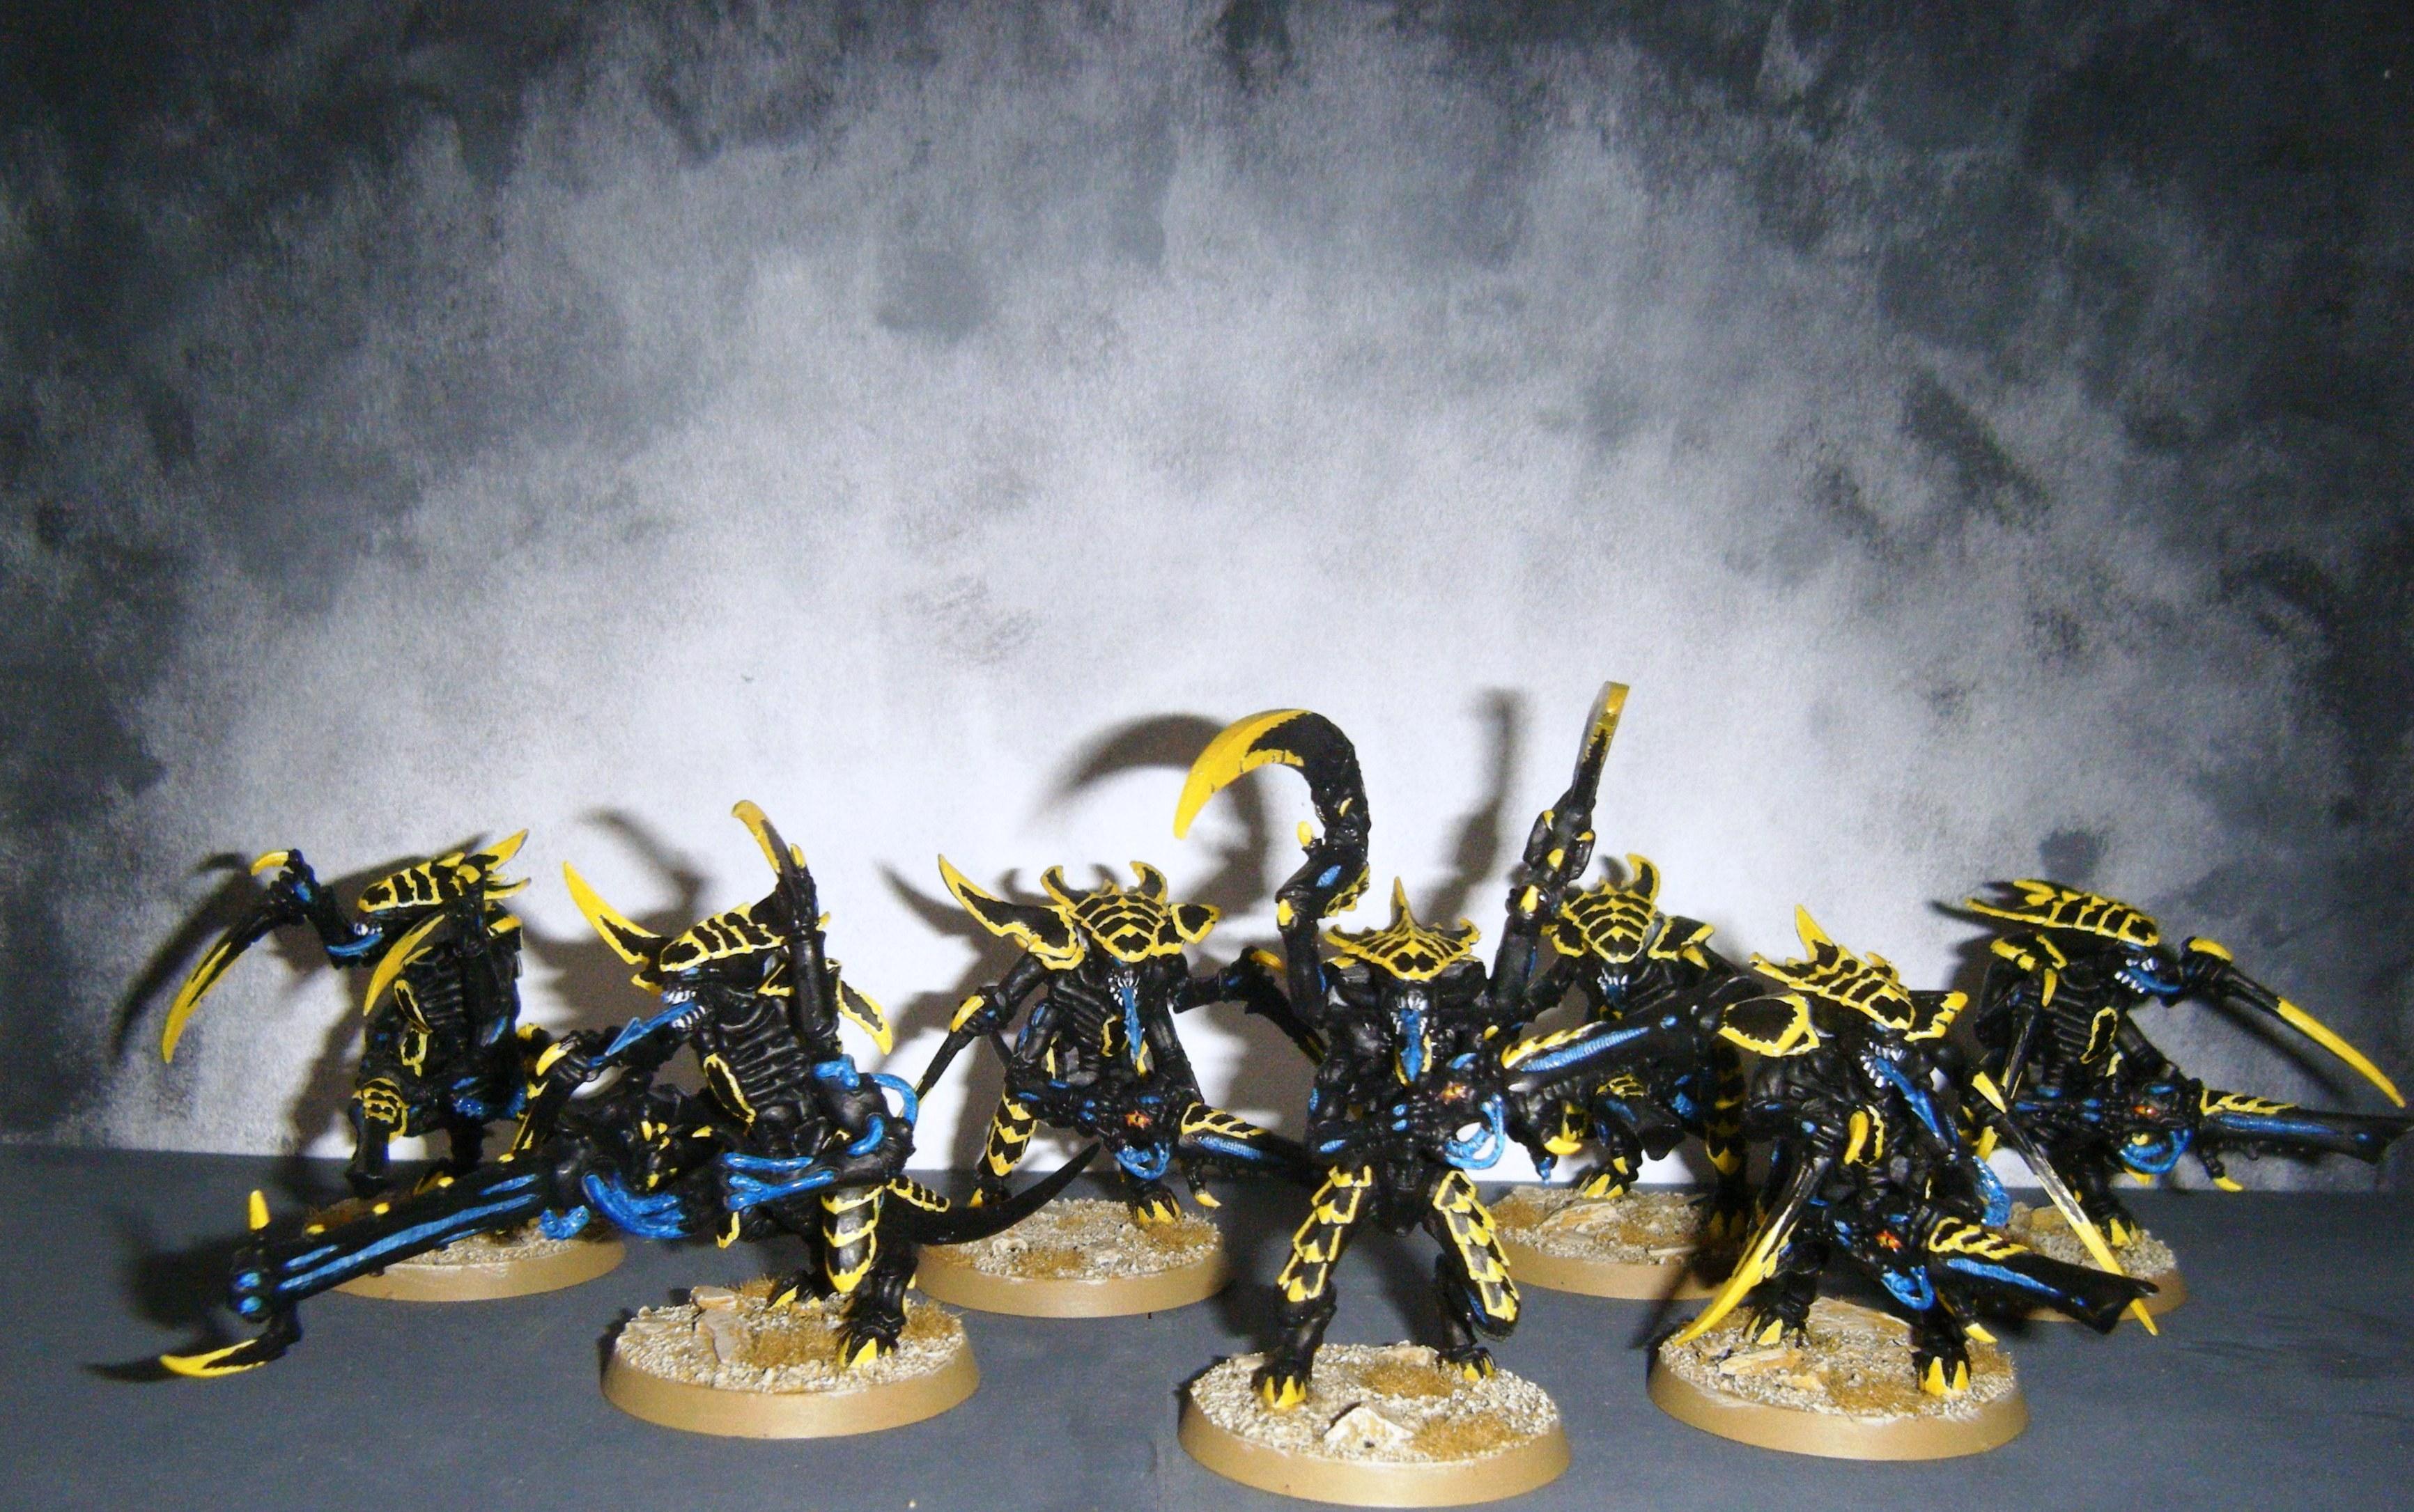 Guerriers Tyranides, Nids, Prime, Sable, Sand, Tyranid Prime, Tyranid Warriors, Tyranides, Tyranids, Wasp